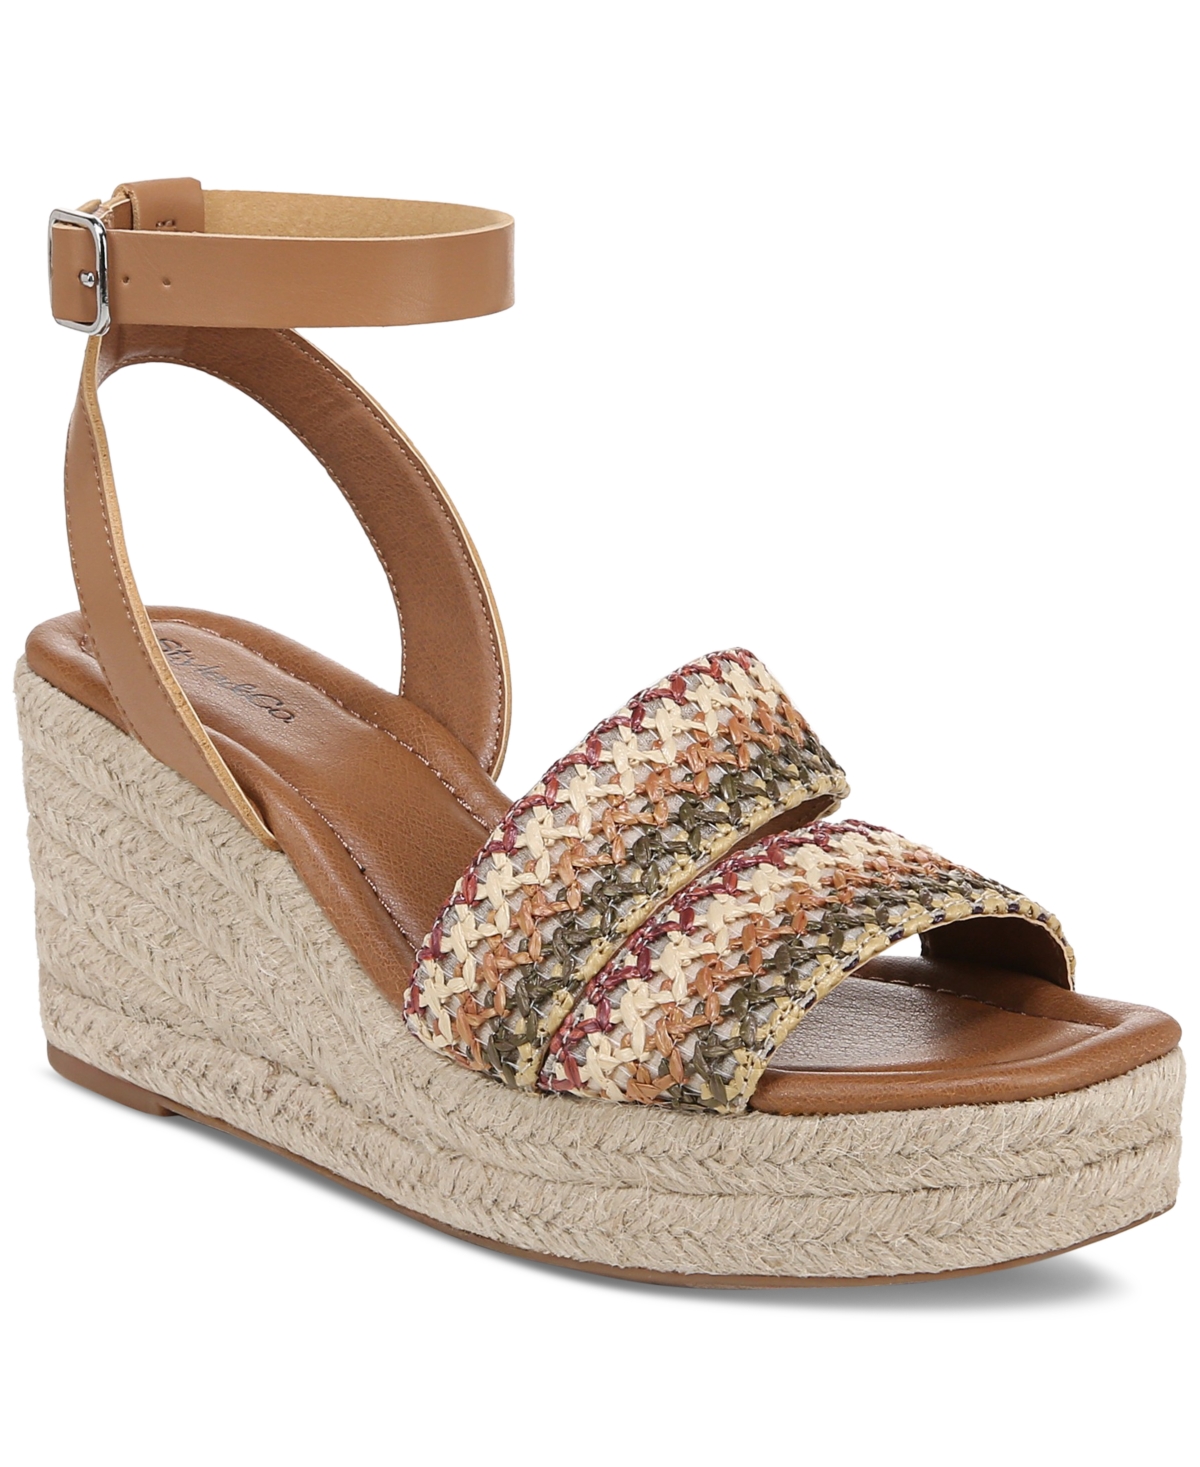 Ceicillaa Strappy Woven Wedge Sandals, Created for Macy's - Berry Multi Crochet